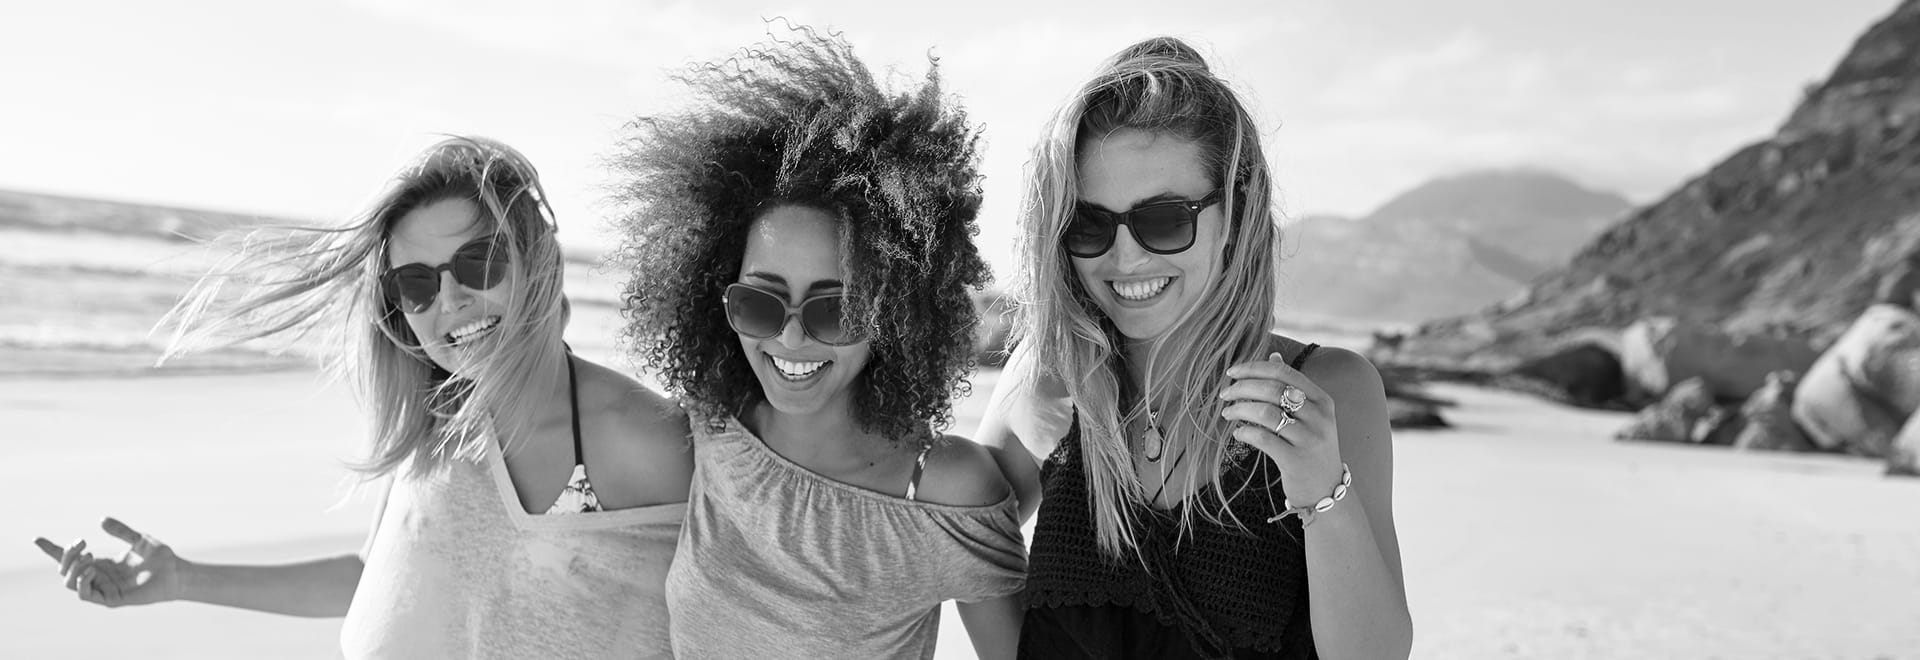 The black and white photo of 3 smiling women on the beach